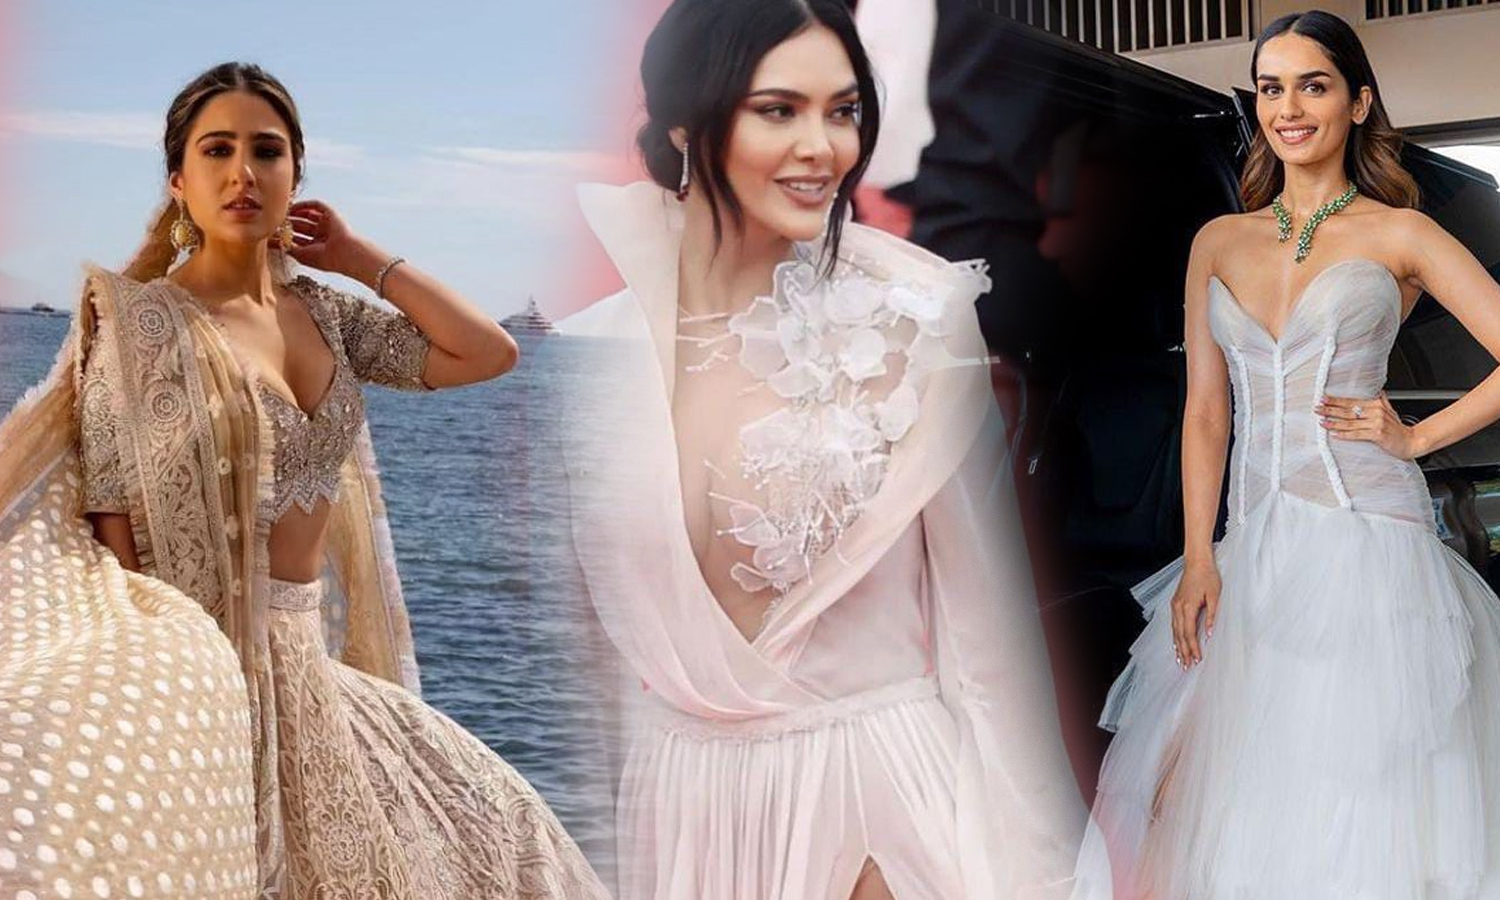 Check out what these Indians donned at the Cannes Film Festival